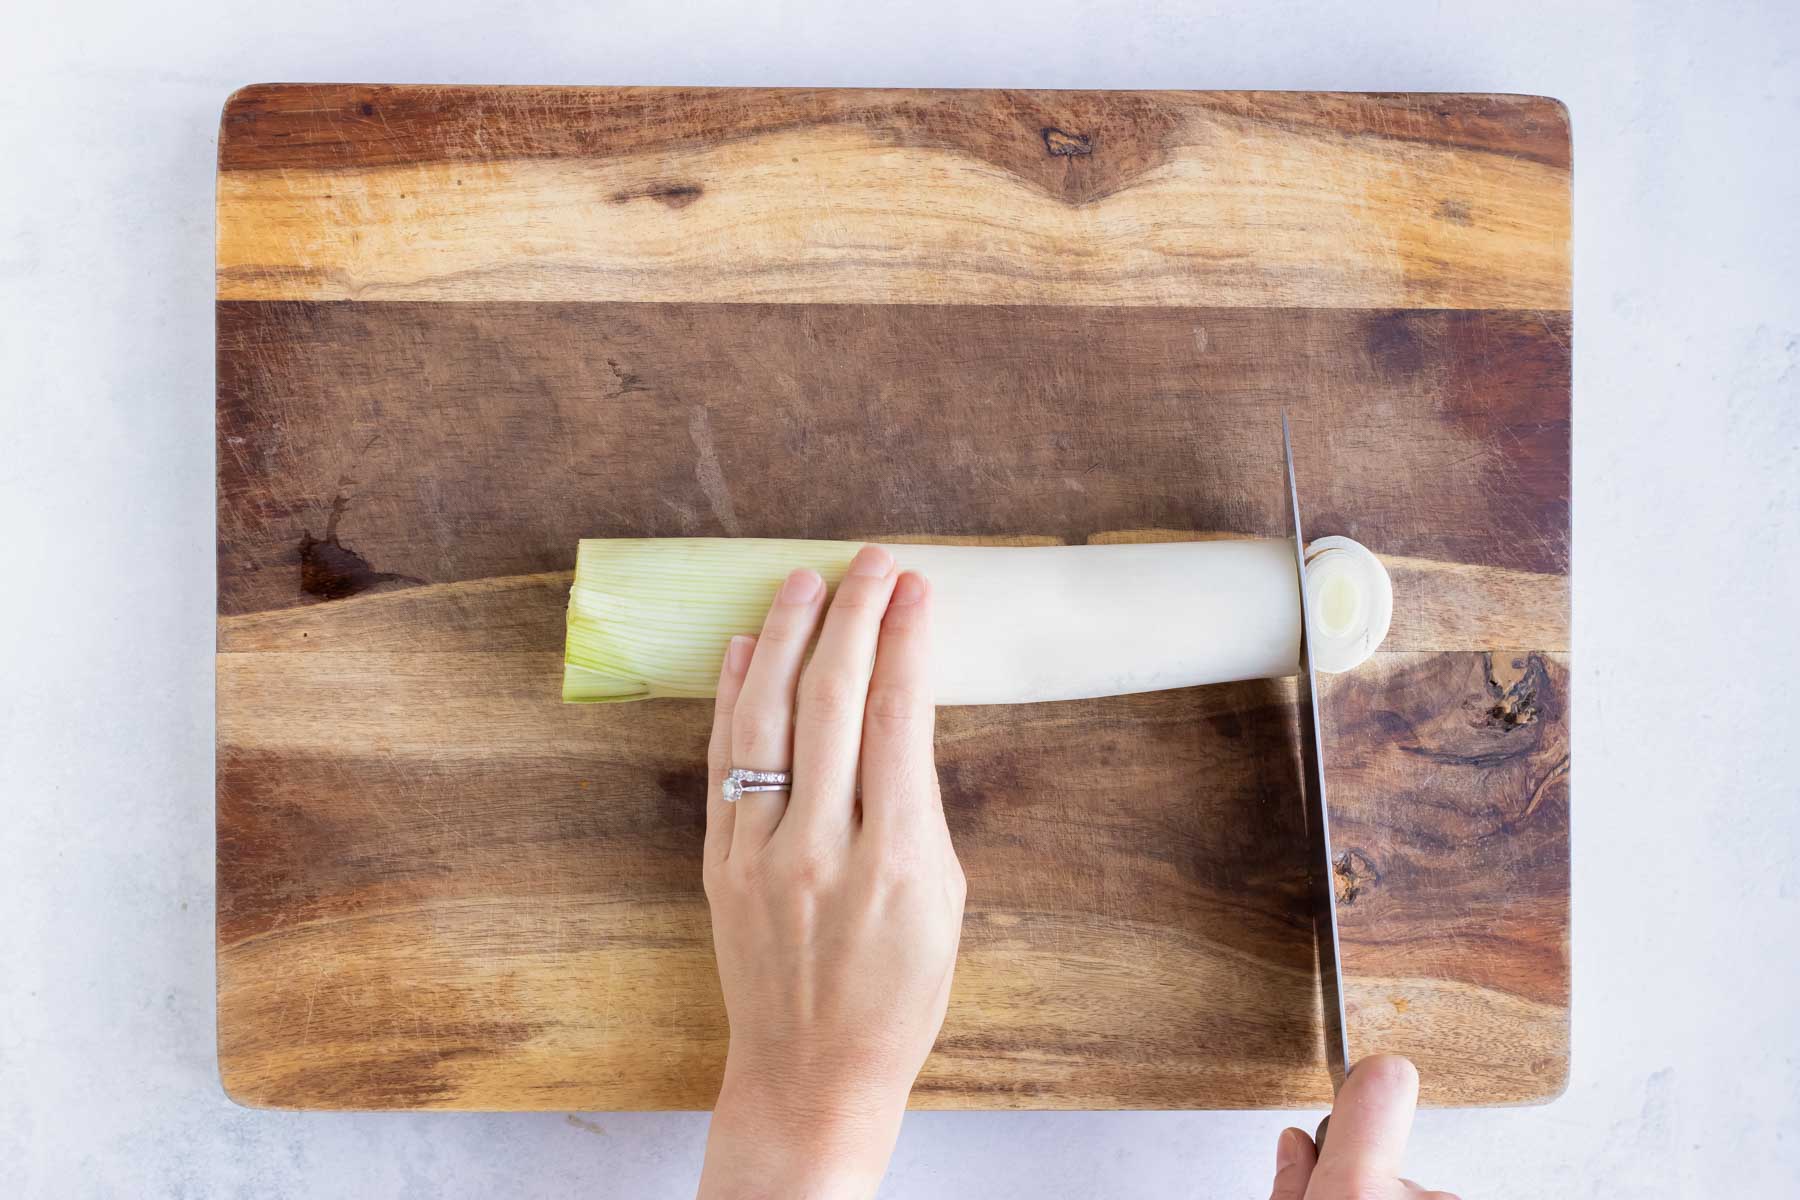 A wooden cutting board with a fresh leek on it and cutting it into thin slices.